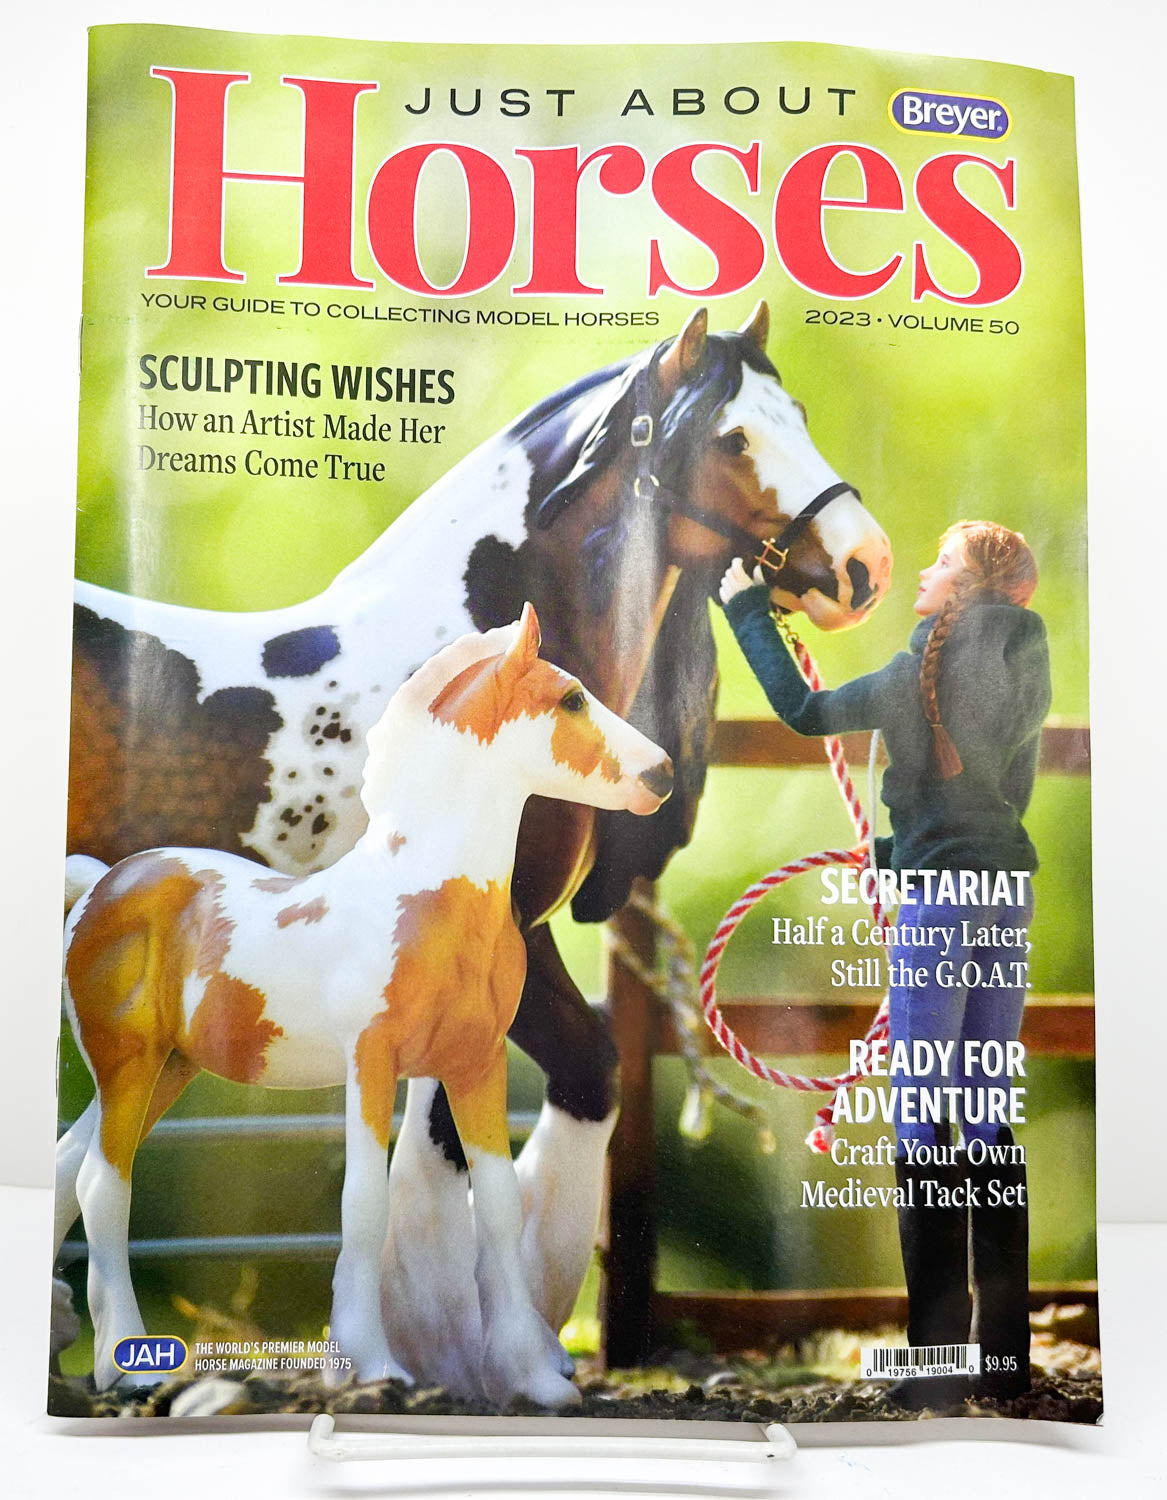 Just About Horses Magazine Vol. 50, 2023